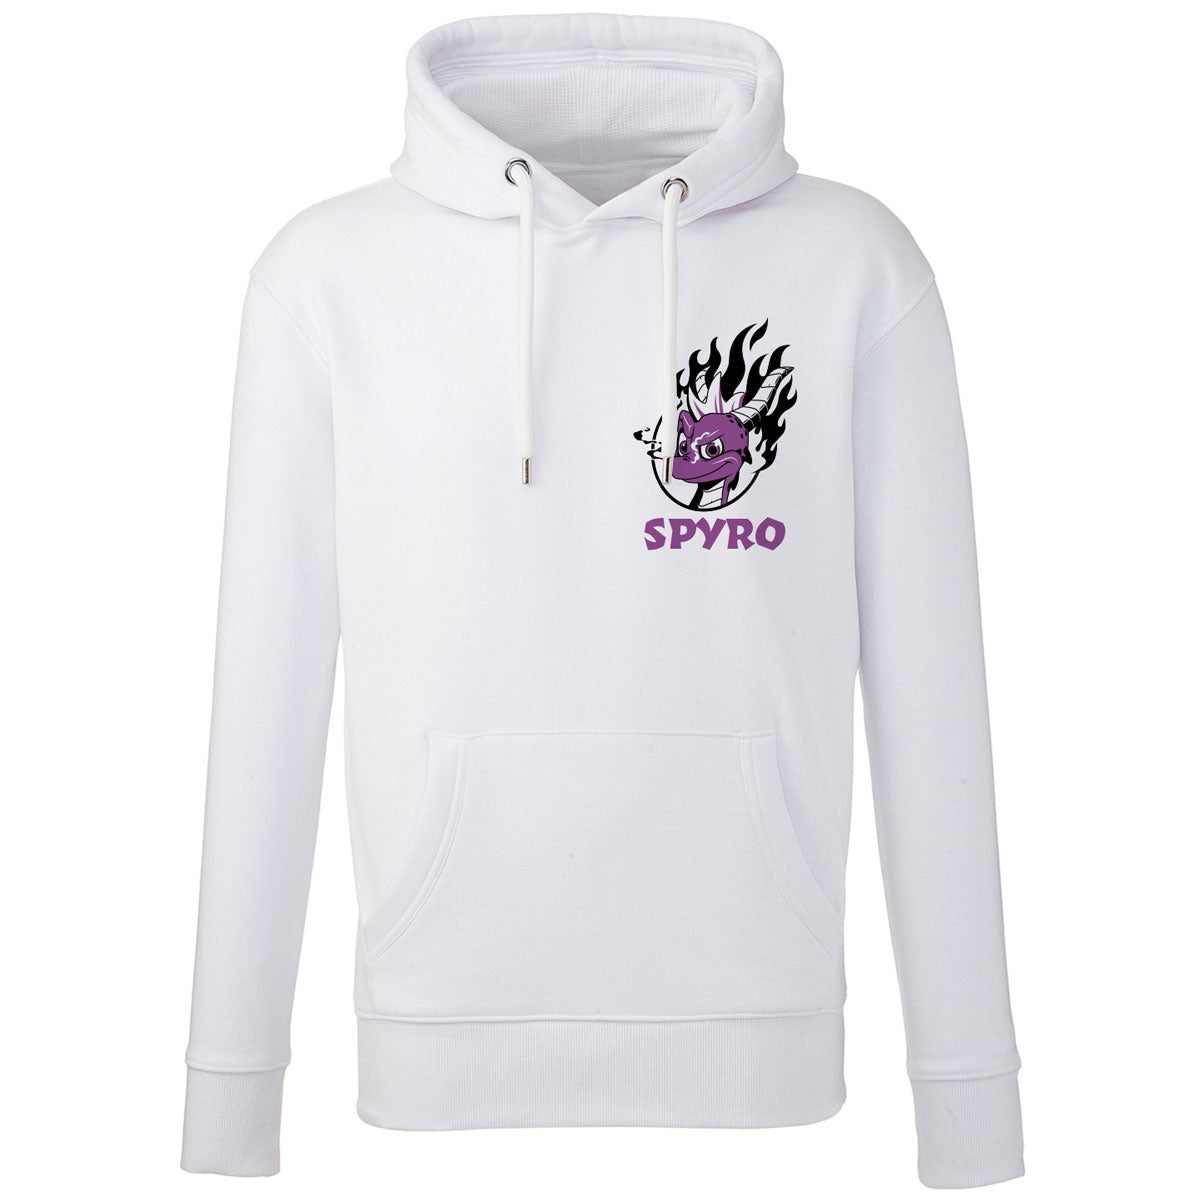 Spyro Flaming Hoodie with Small Chest Emblem and Large Print design on Reverse, in White